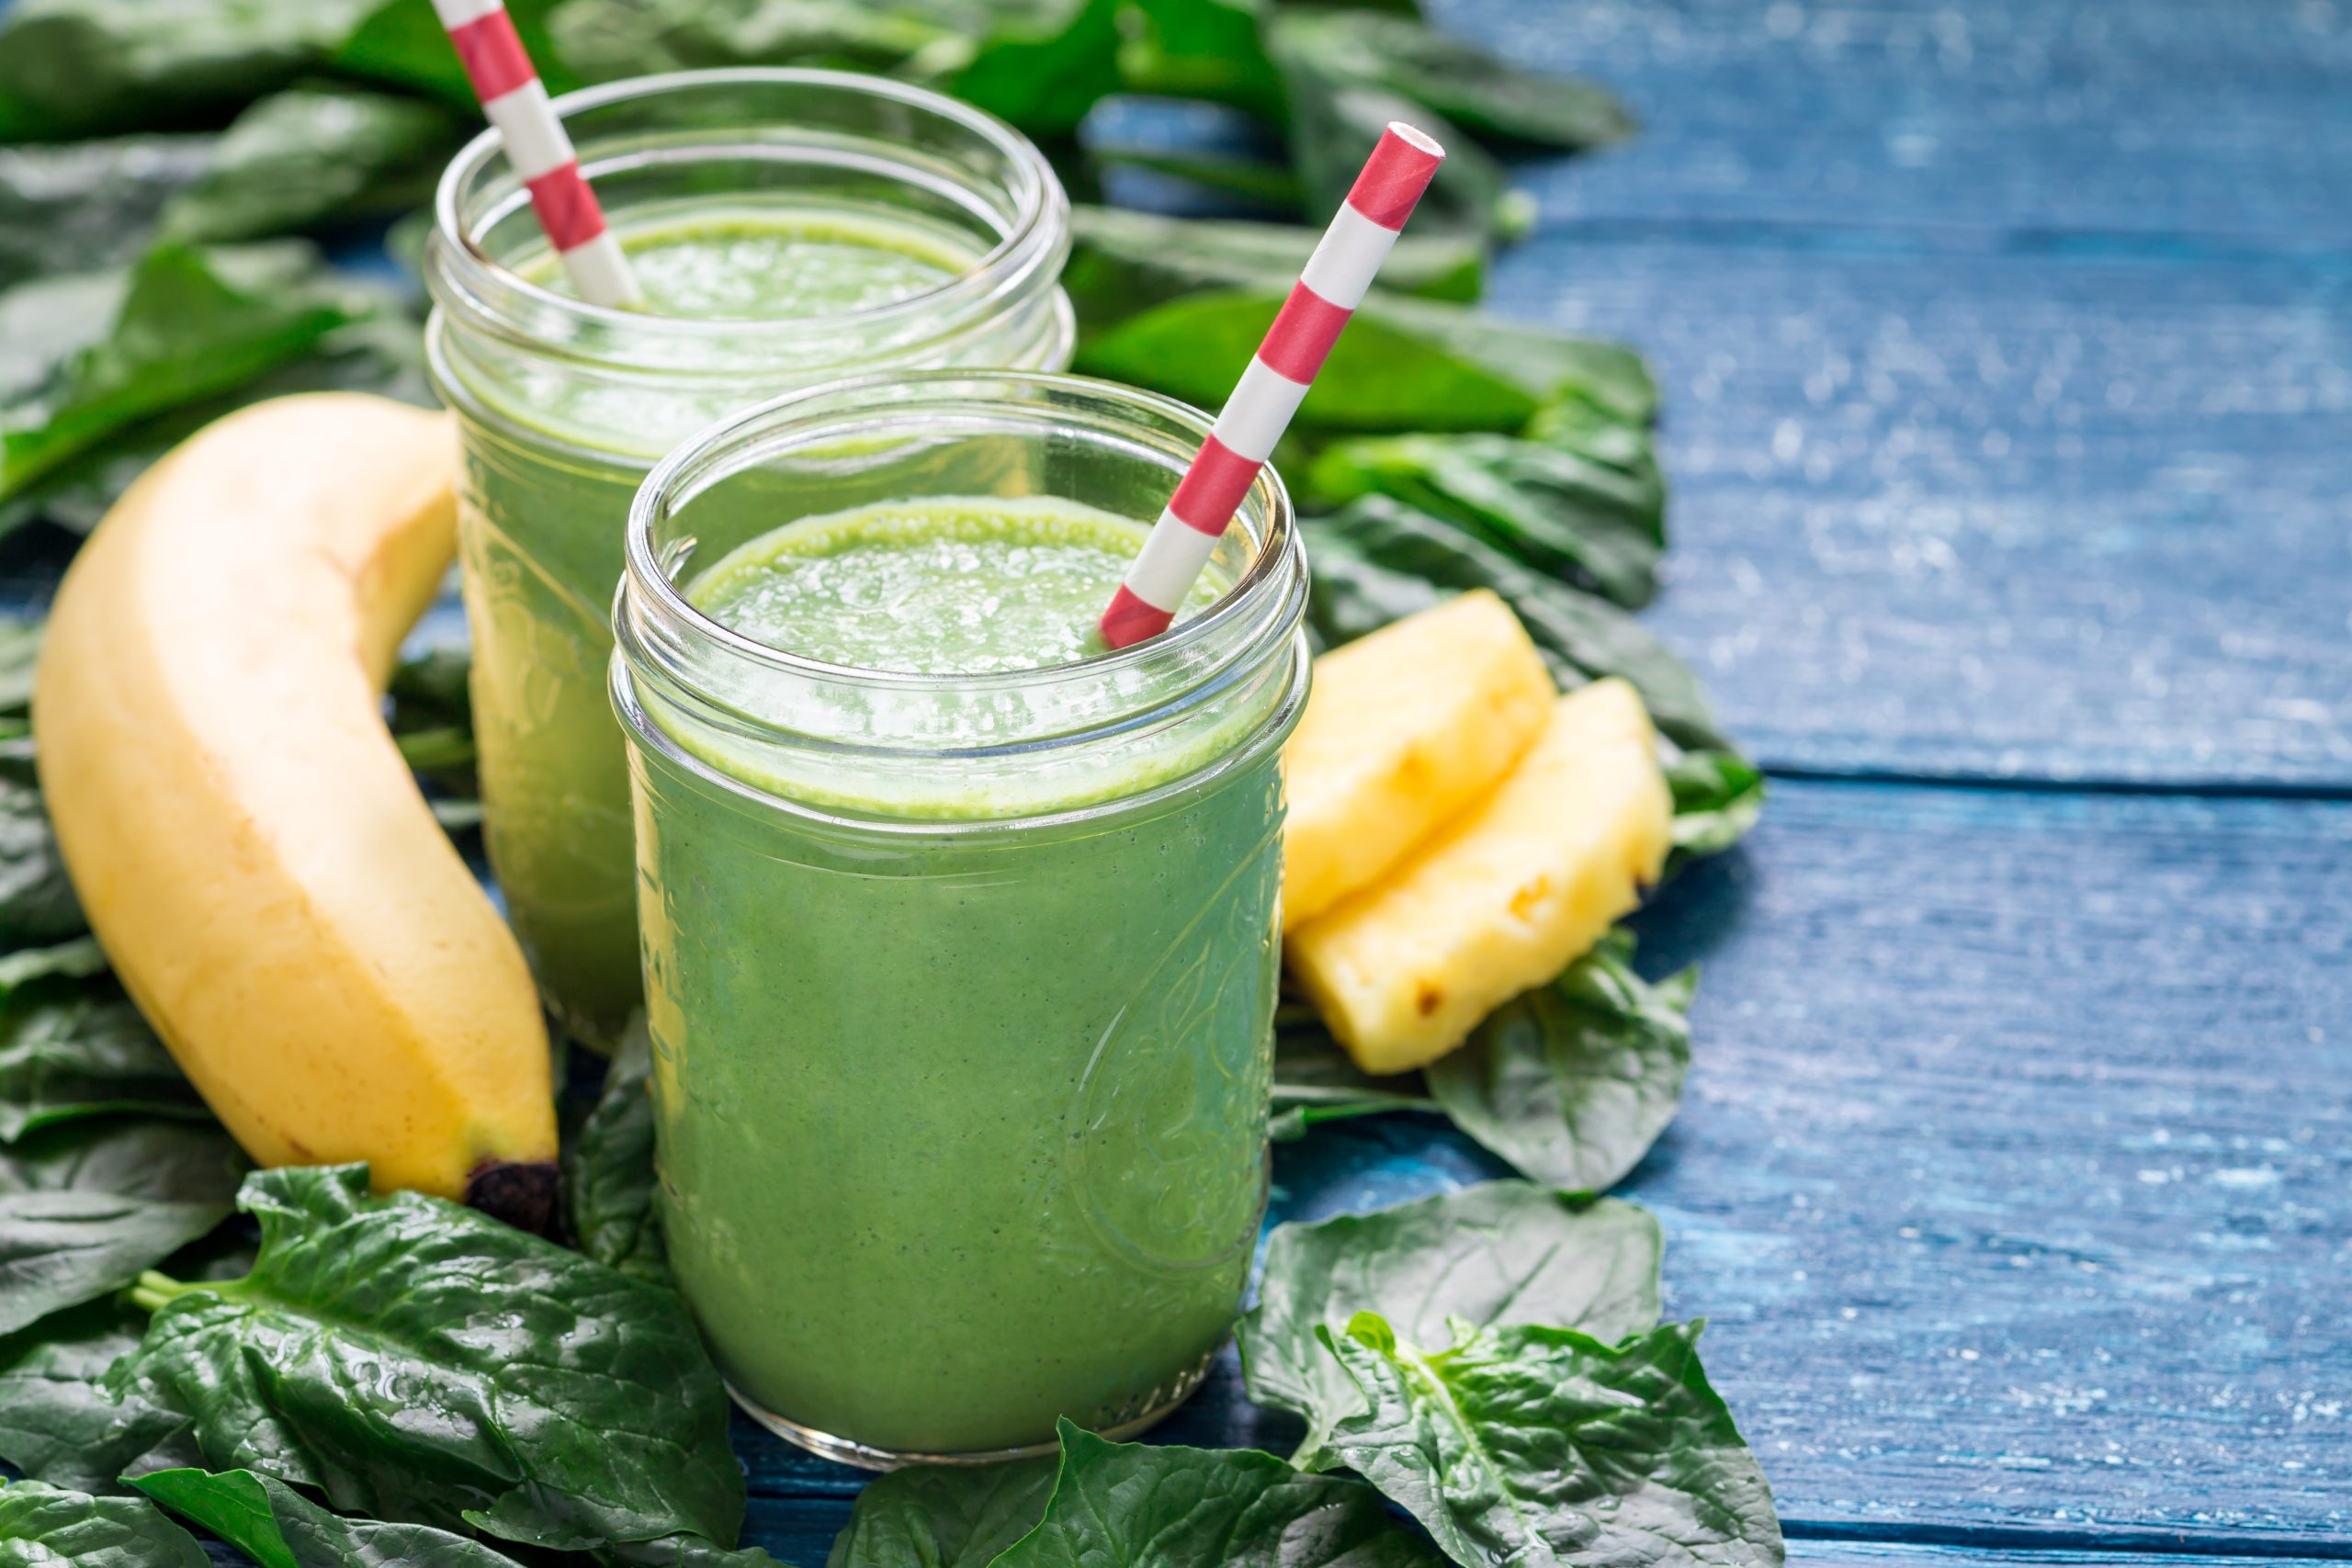 Fuel your movement recipe of the month: Green smoothie